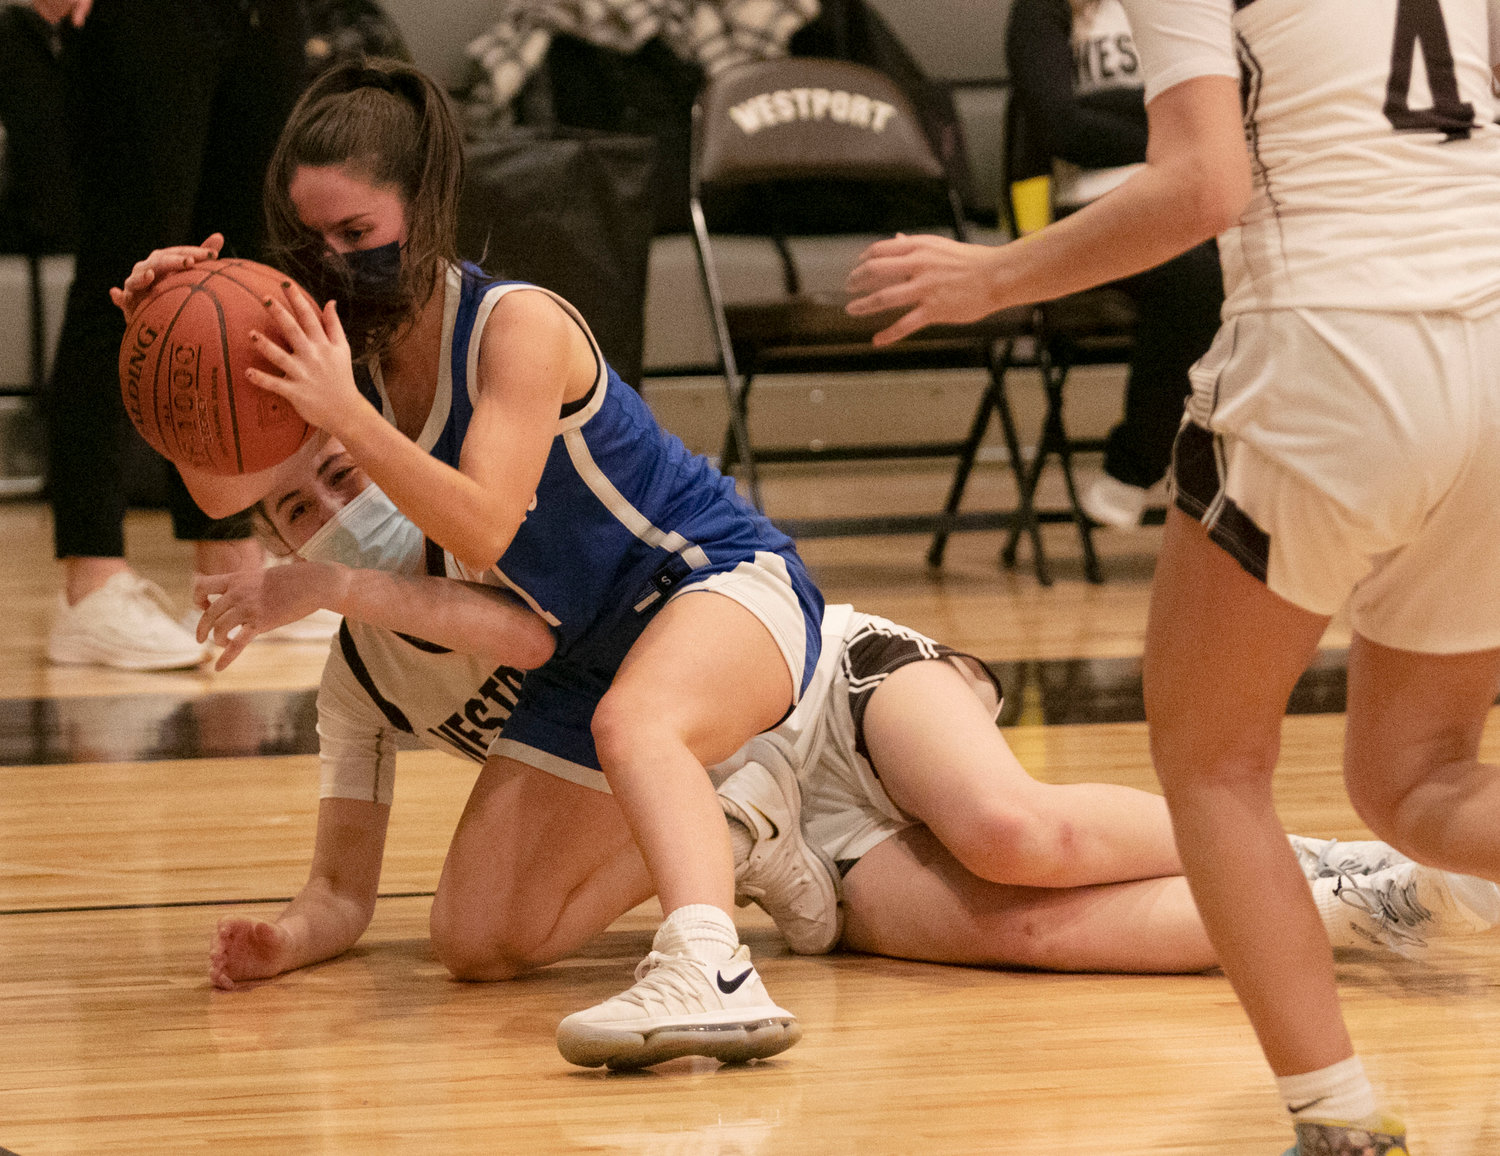 Molly Molloy falls while grabbing at a loose ball in the second half.